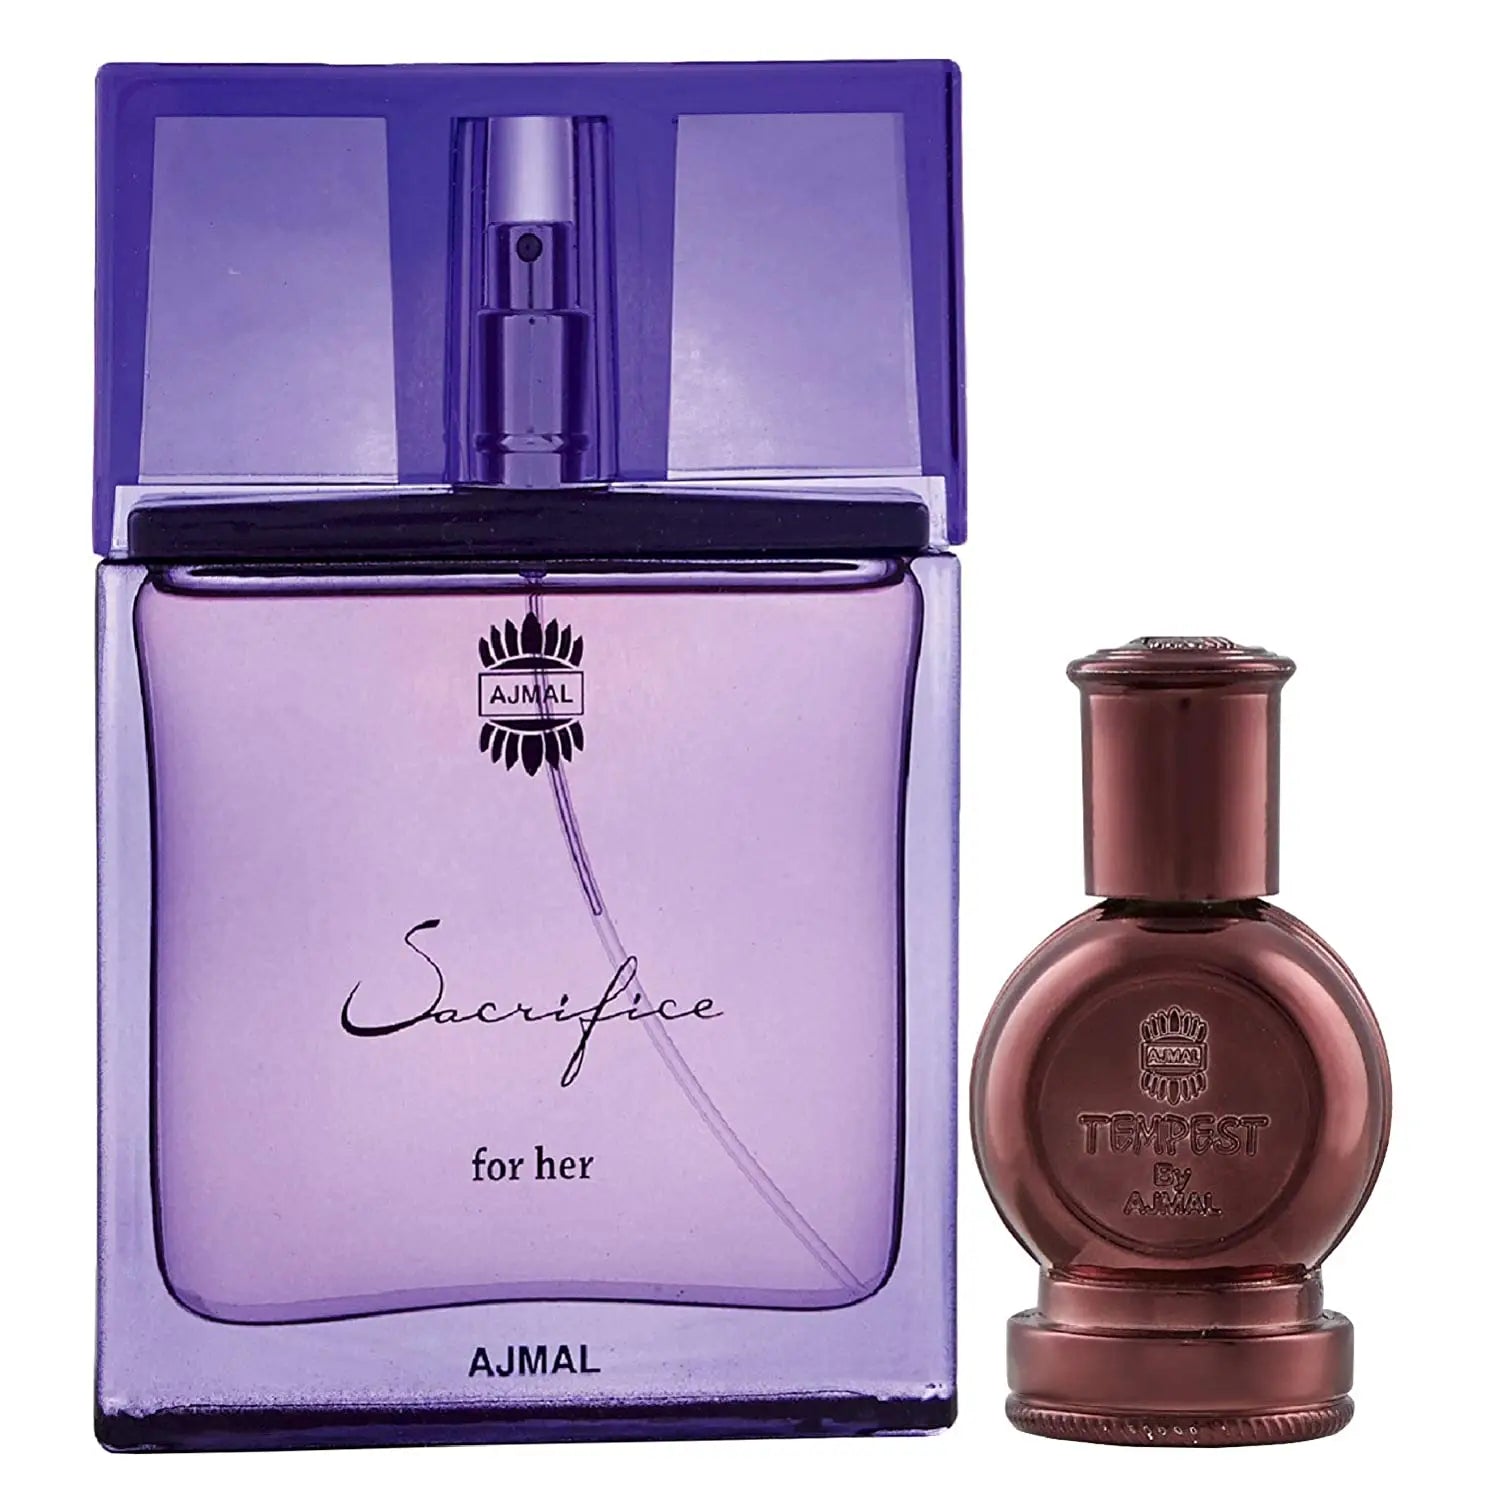 Ajmal Sacrifice for HER EDP + Tempest Concentrated Perfume